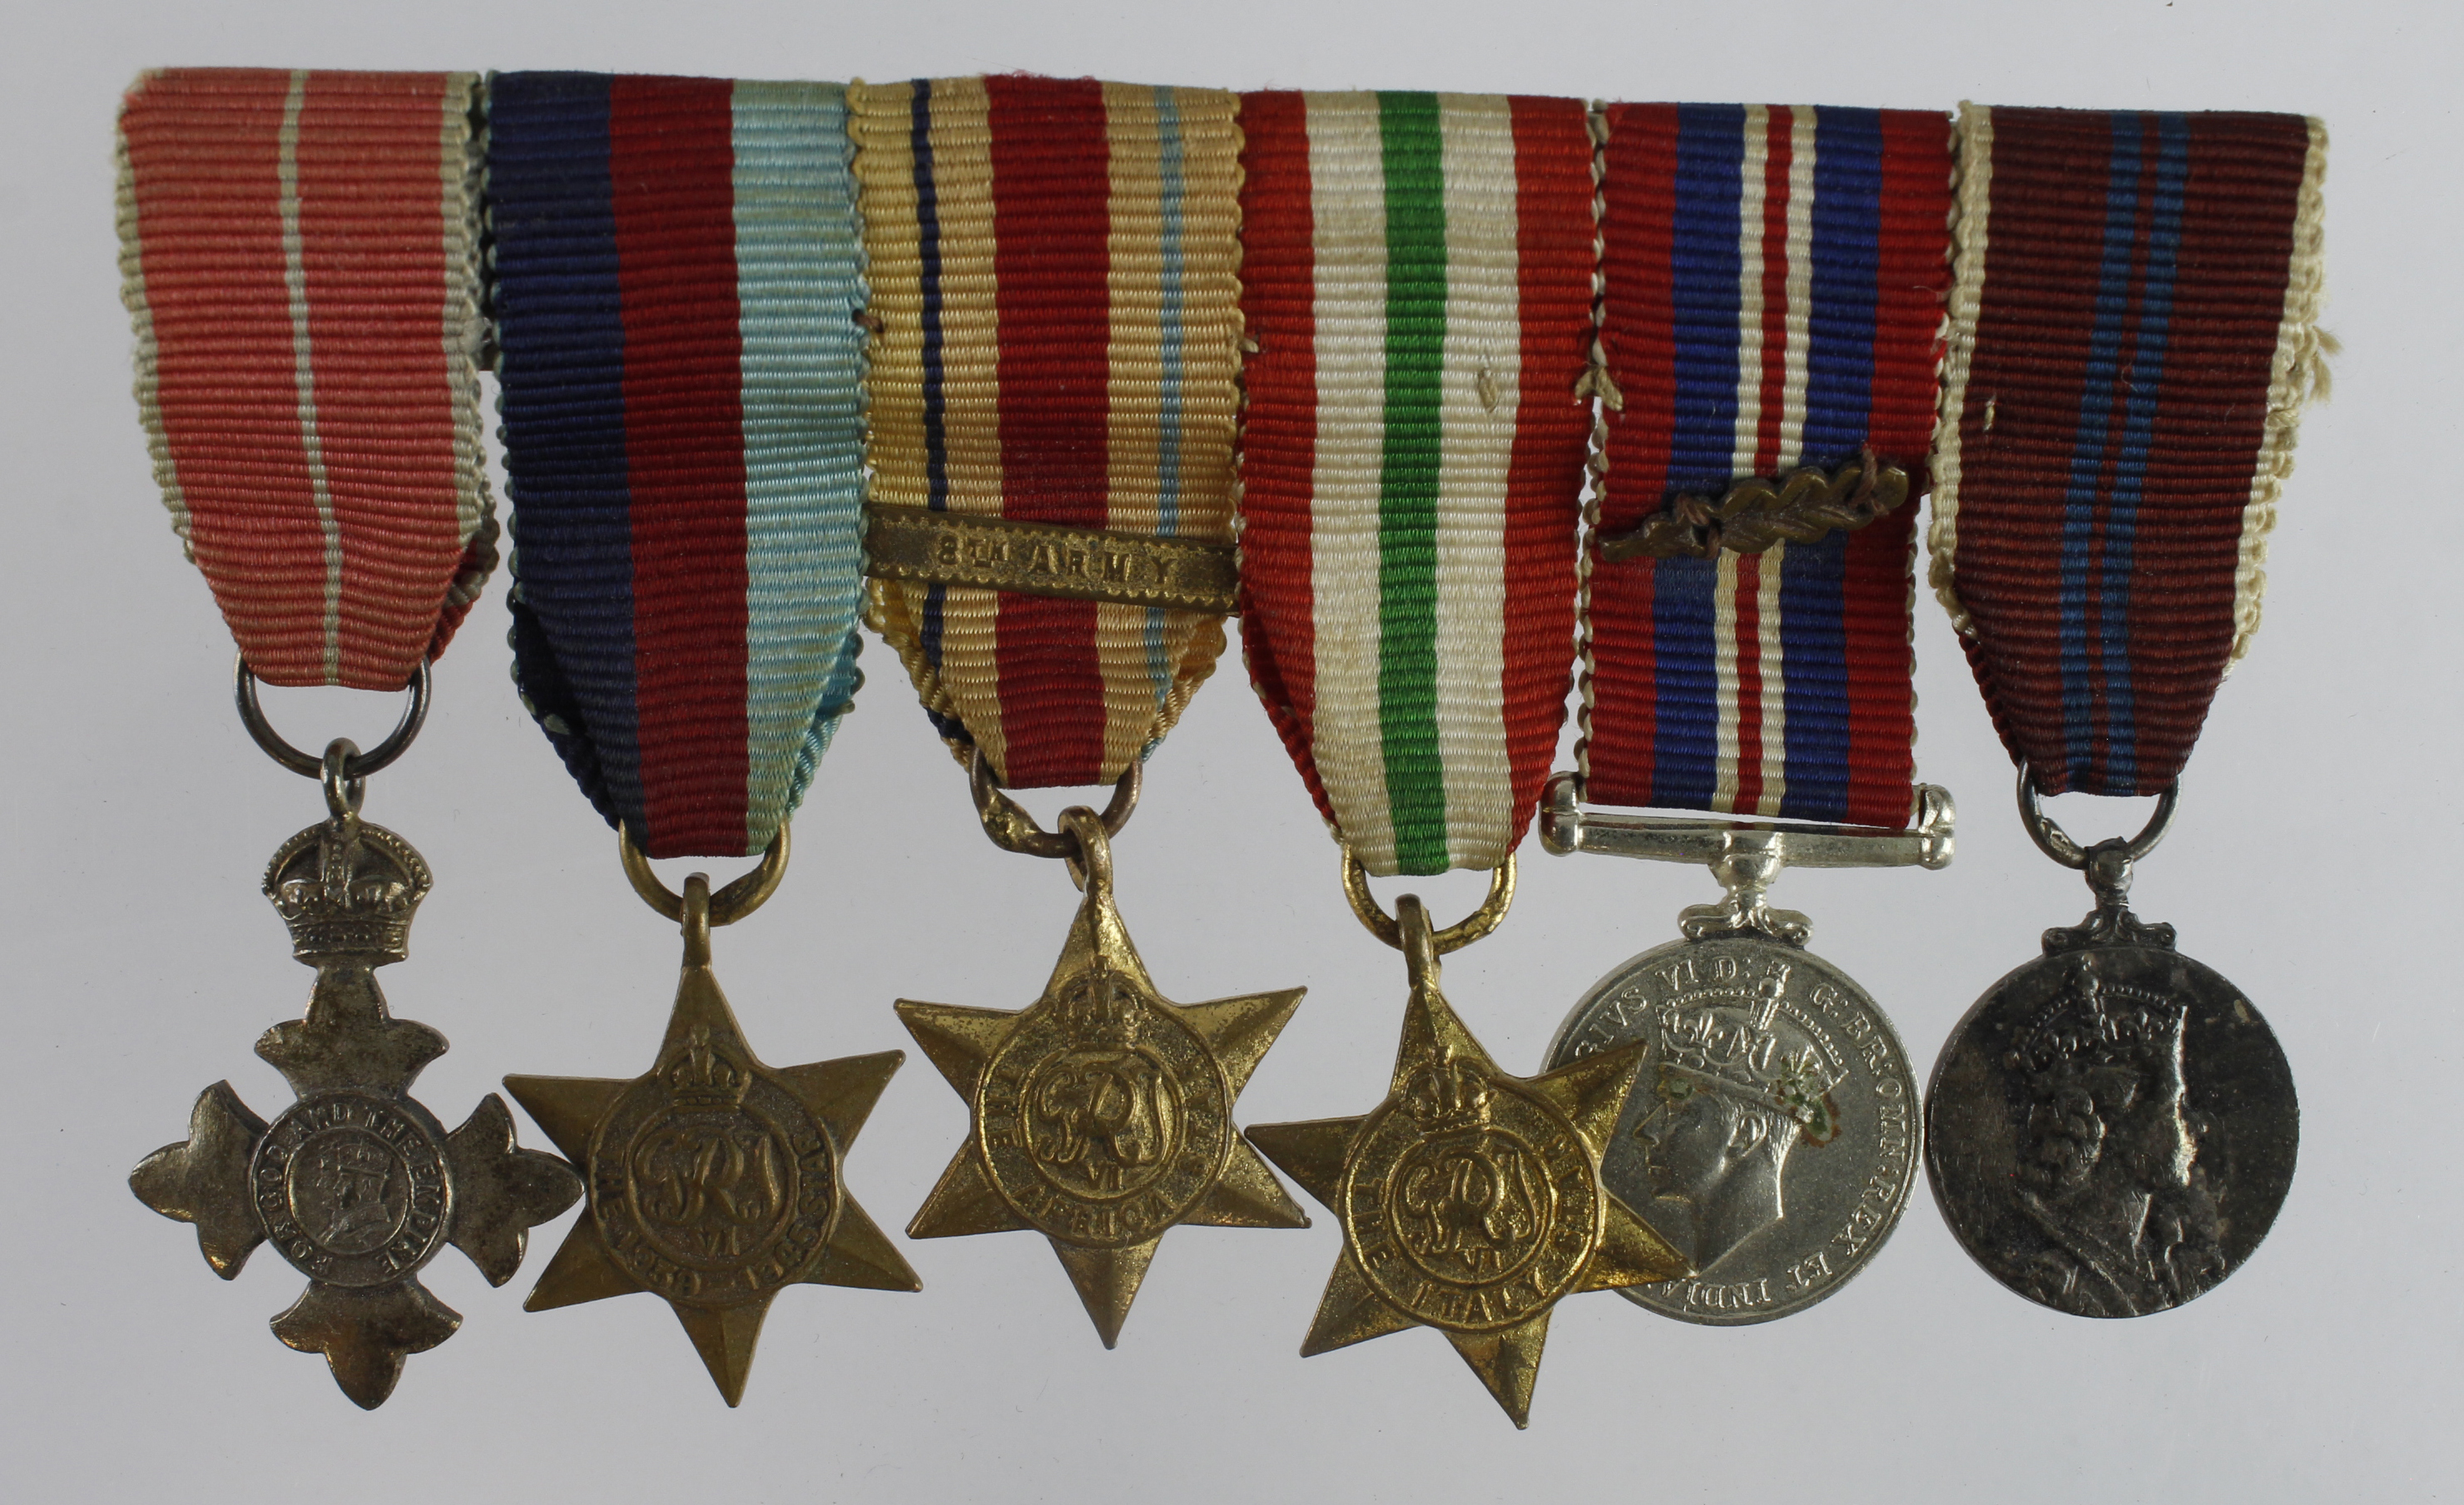 Minature Medal group mounted as worn - OBE (Mily), 1939-45 Star, Africa Star + 8th Army clasp, Italy